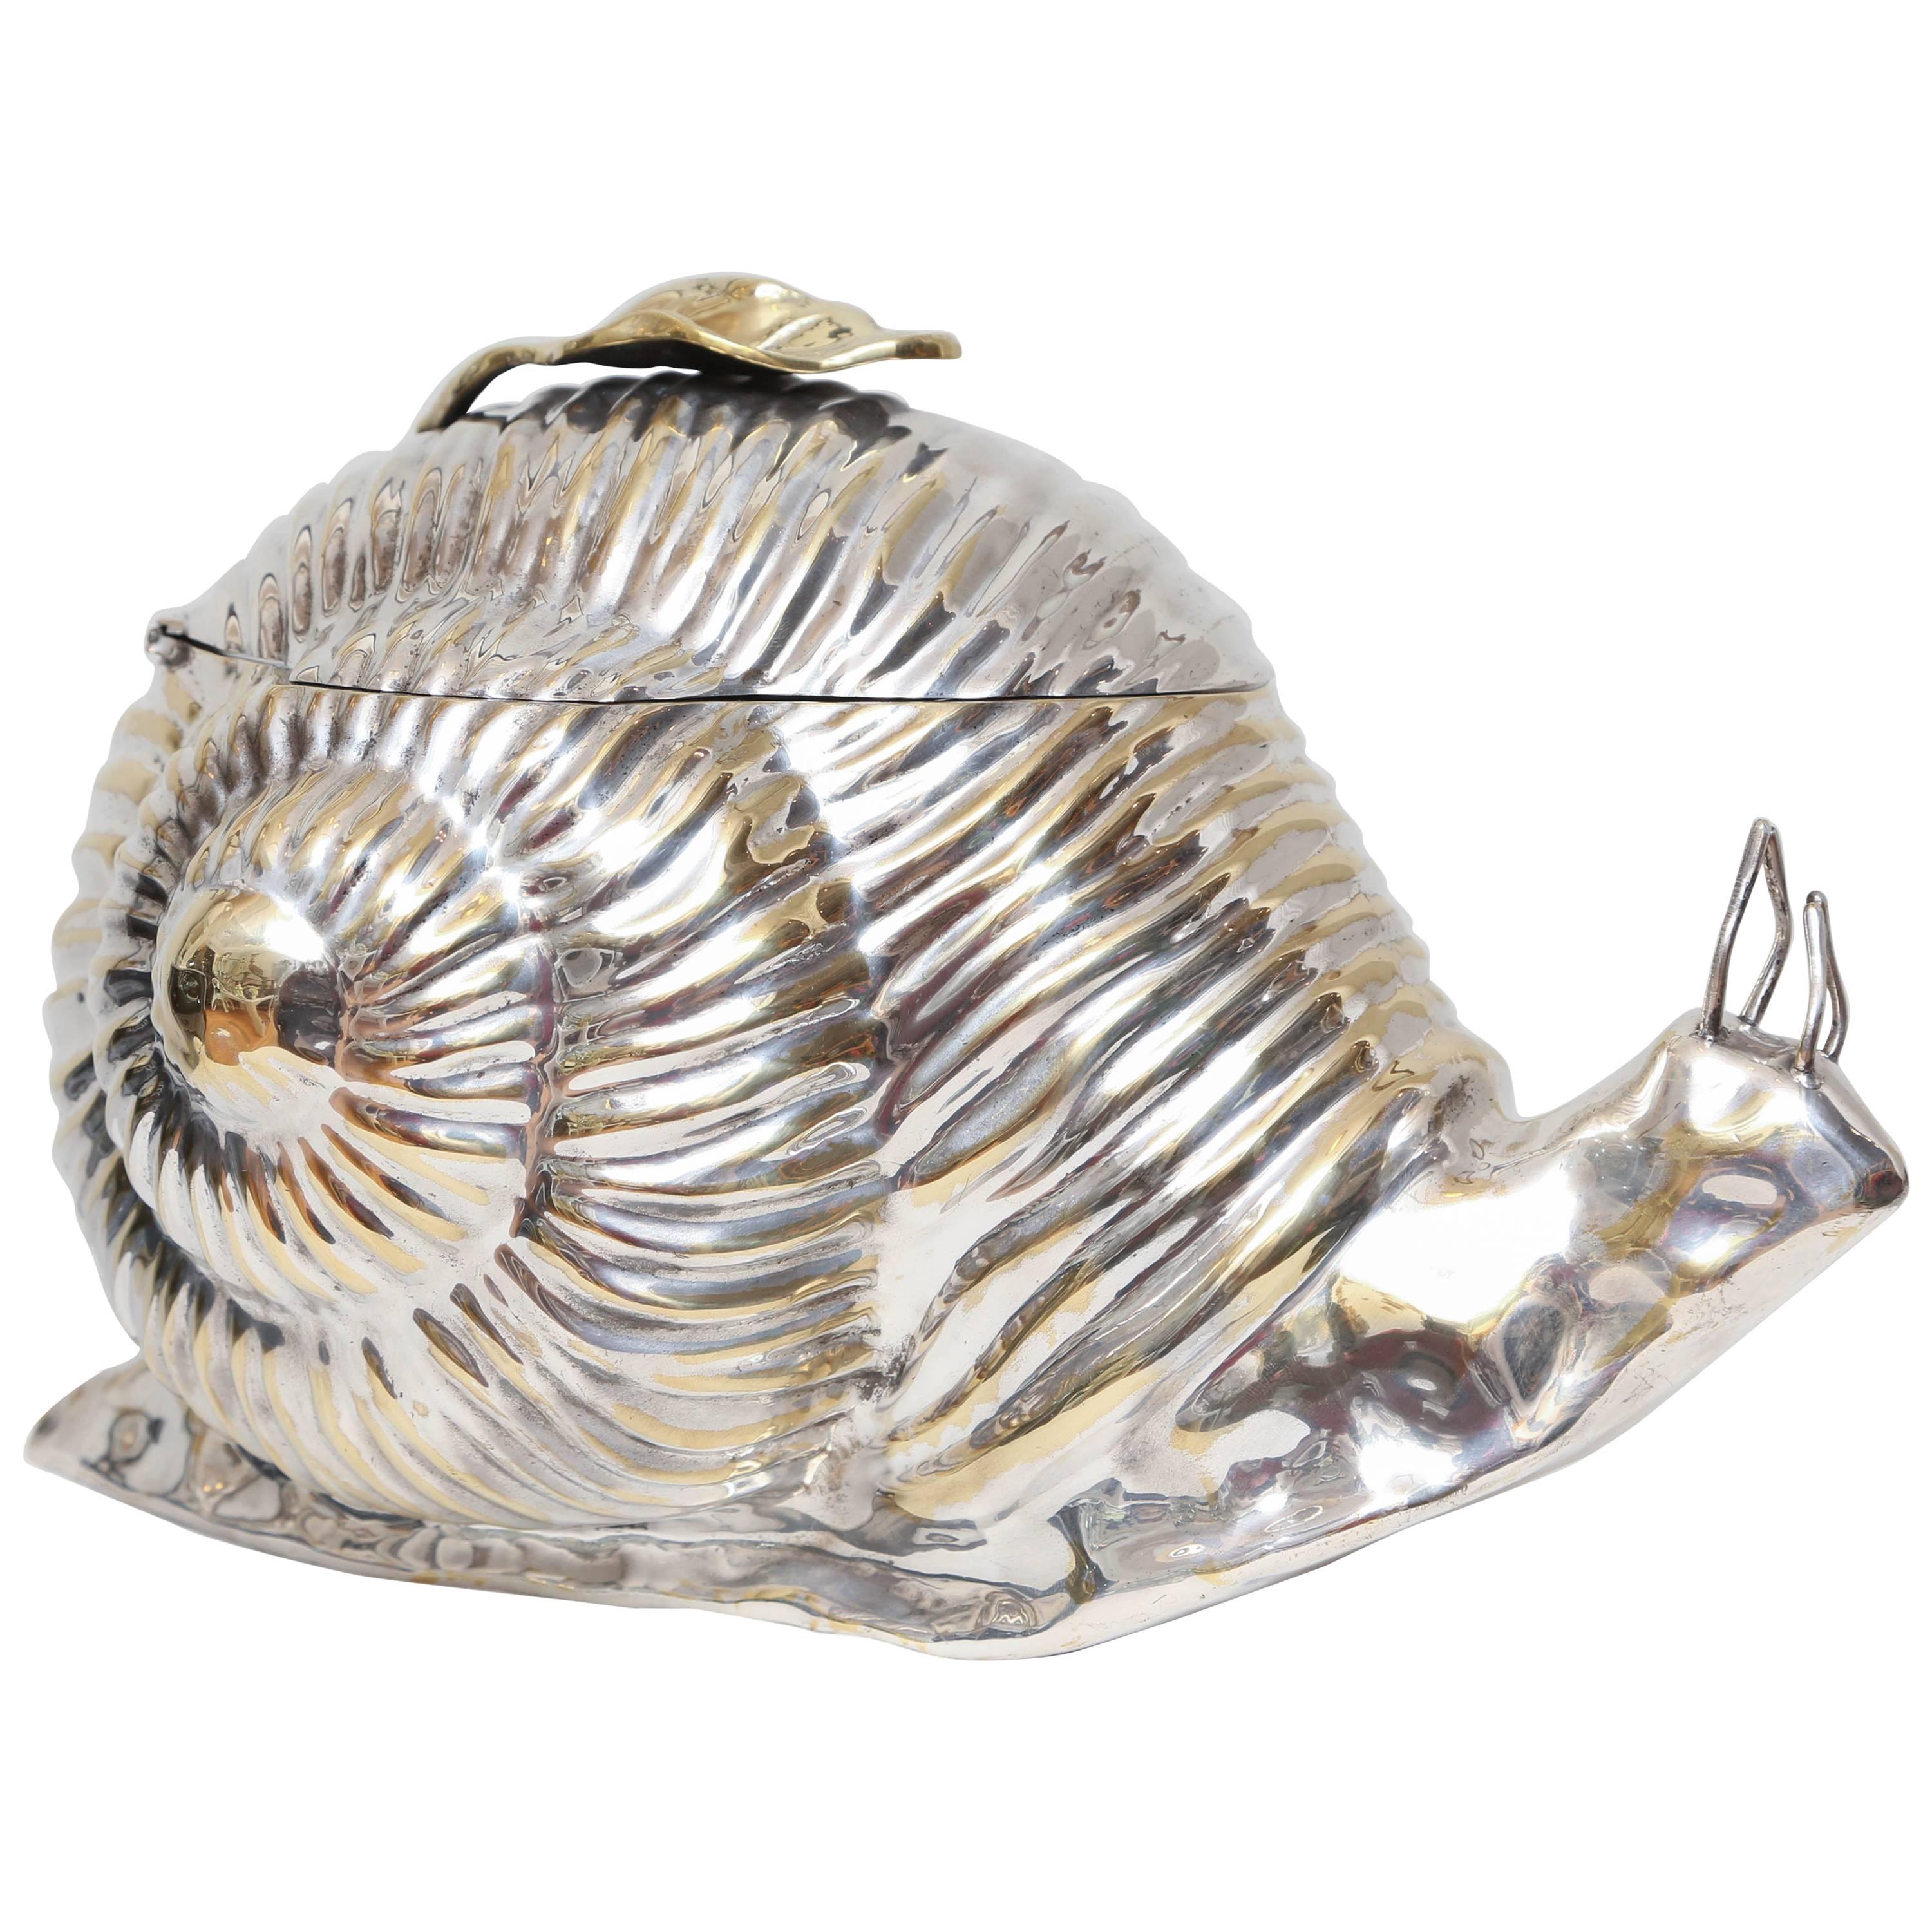 Silver Plated Snail Ice Bucket